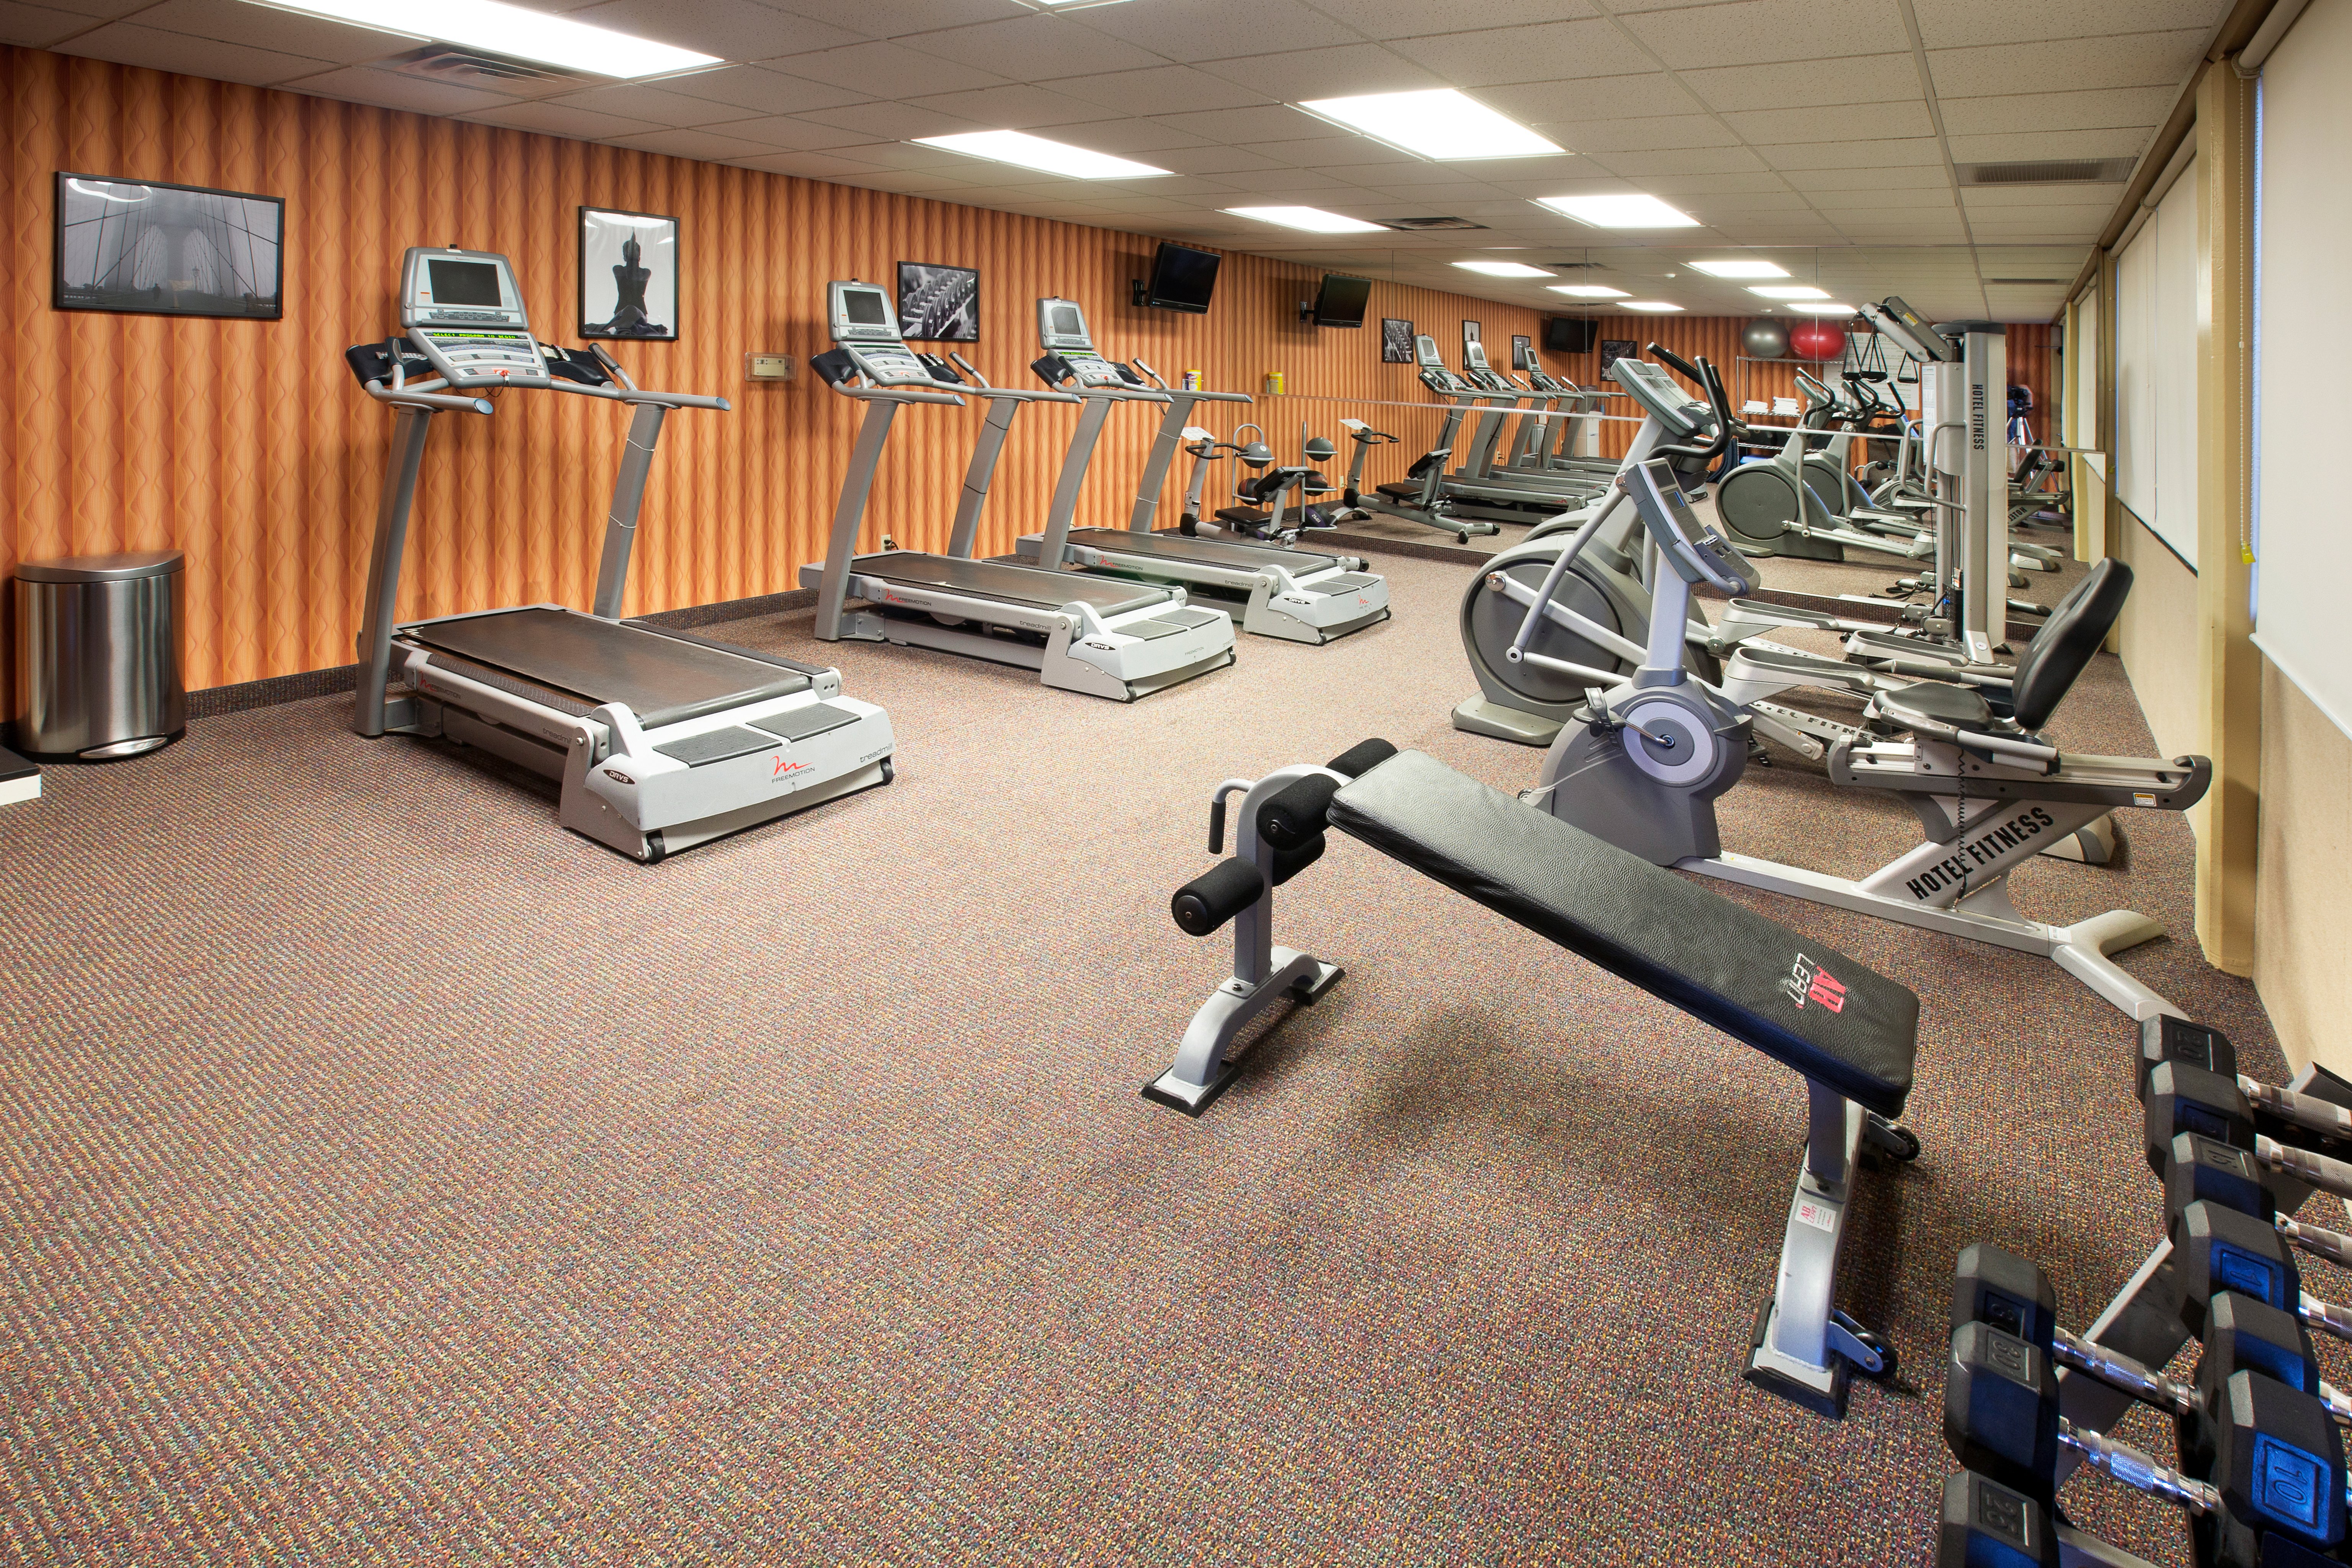 24 Access Fitness Center - Don't leave your workout behind!